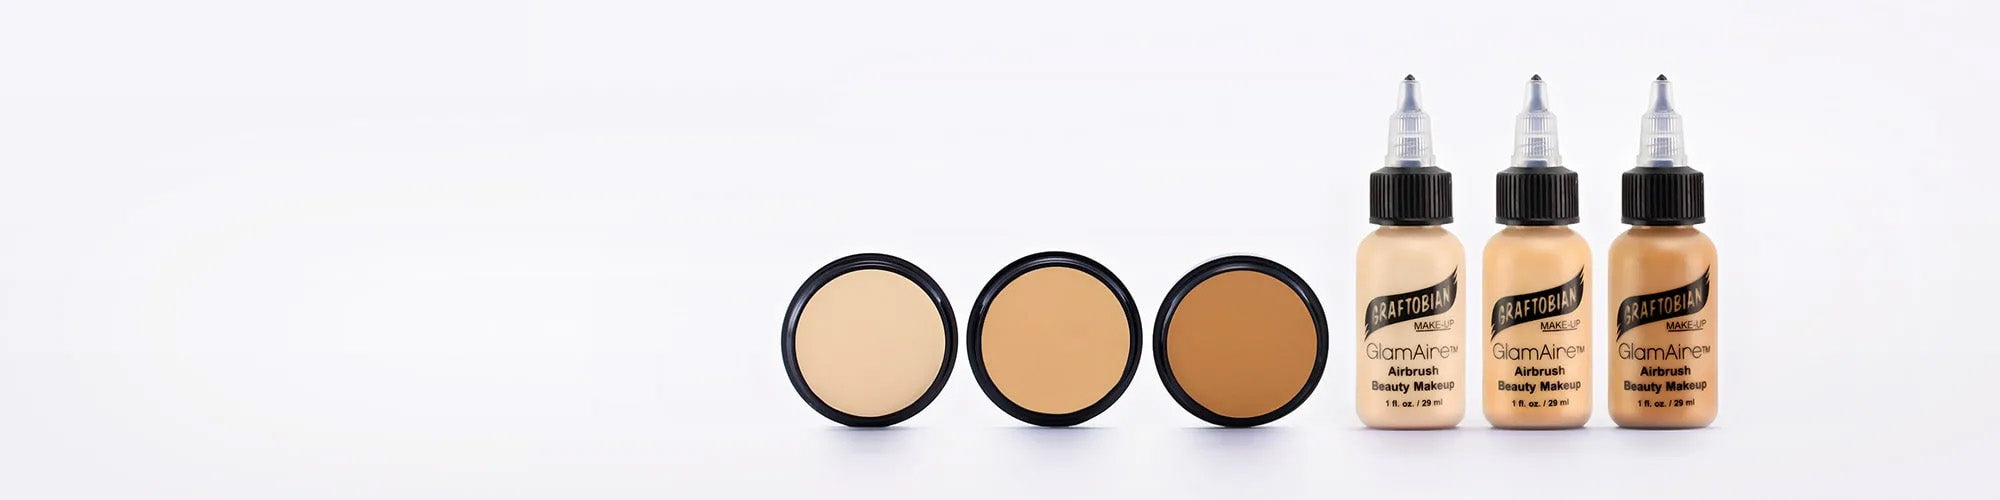 Hydro Proof Foundation Airbrush Makeup